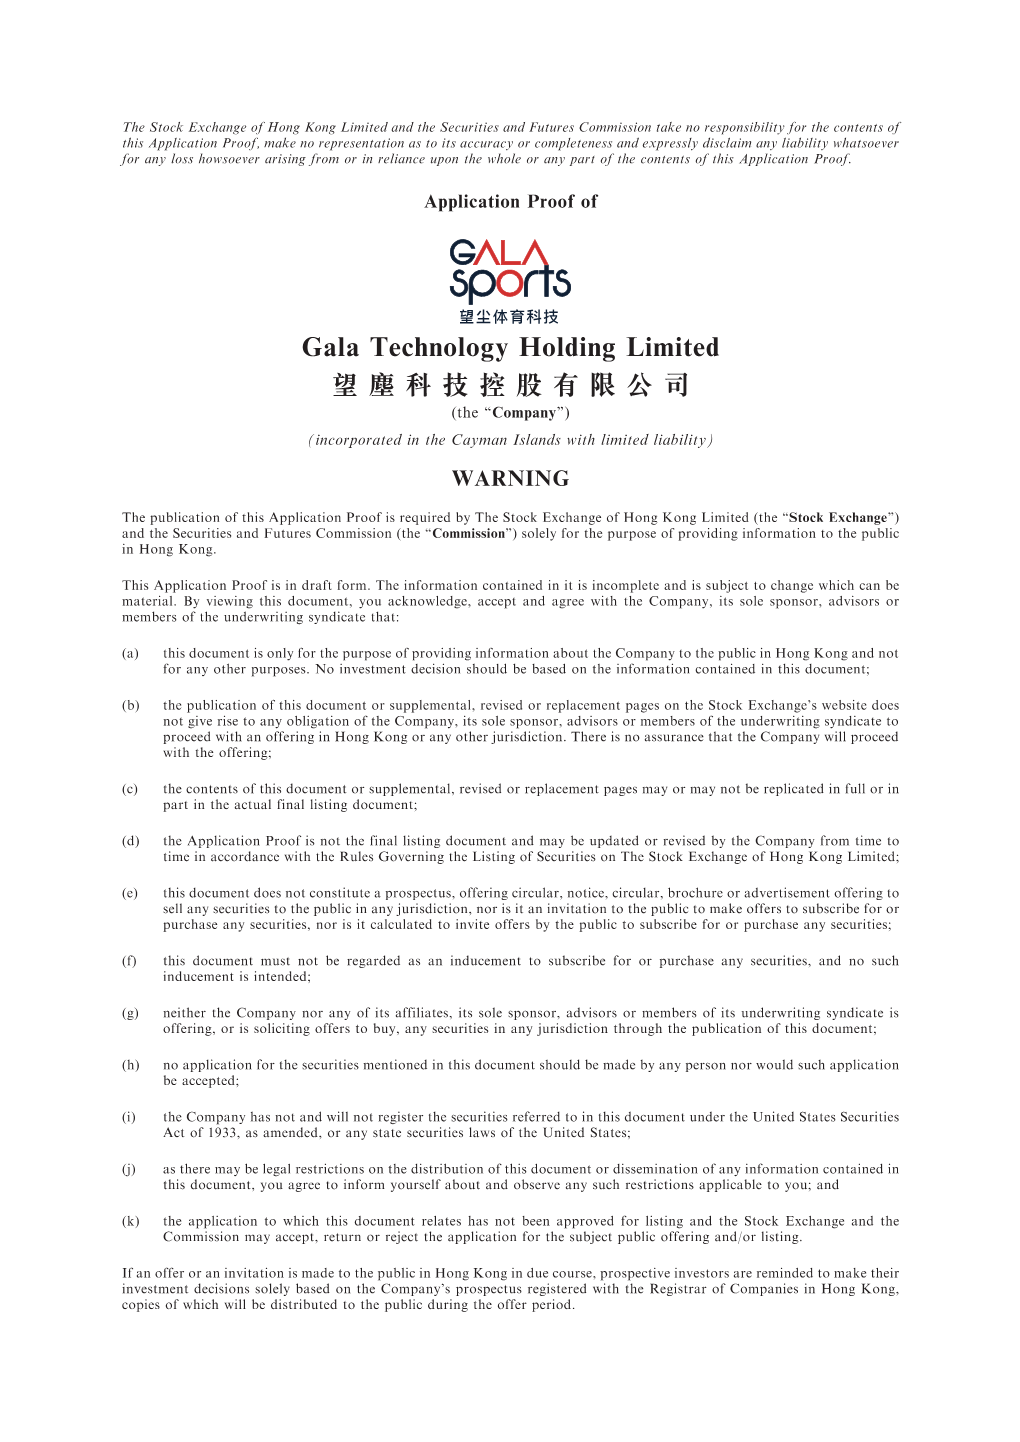 Gala Technology Holding Limited 望 塵 科 技 控 股 有 限 公 司 (The ‘‘Company’’) (Incorporated in the Cayman Islands with Limited Liability) WARNING